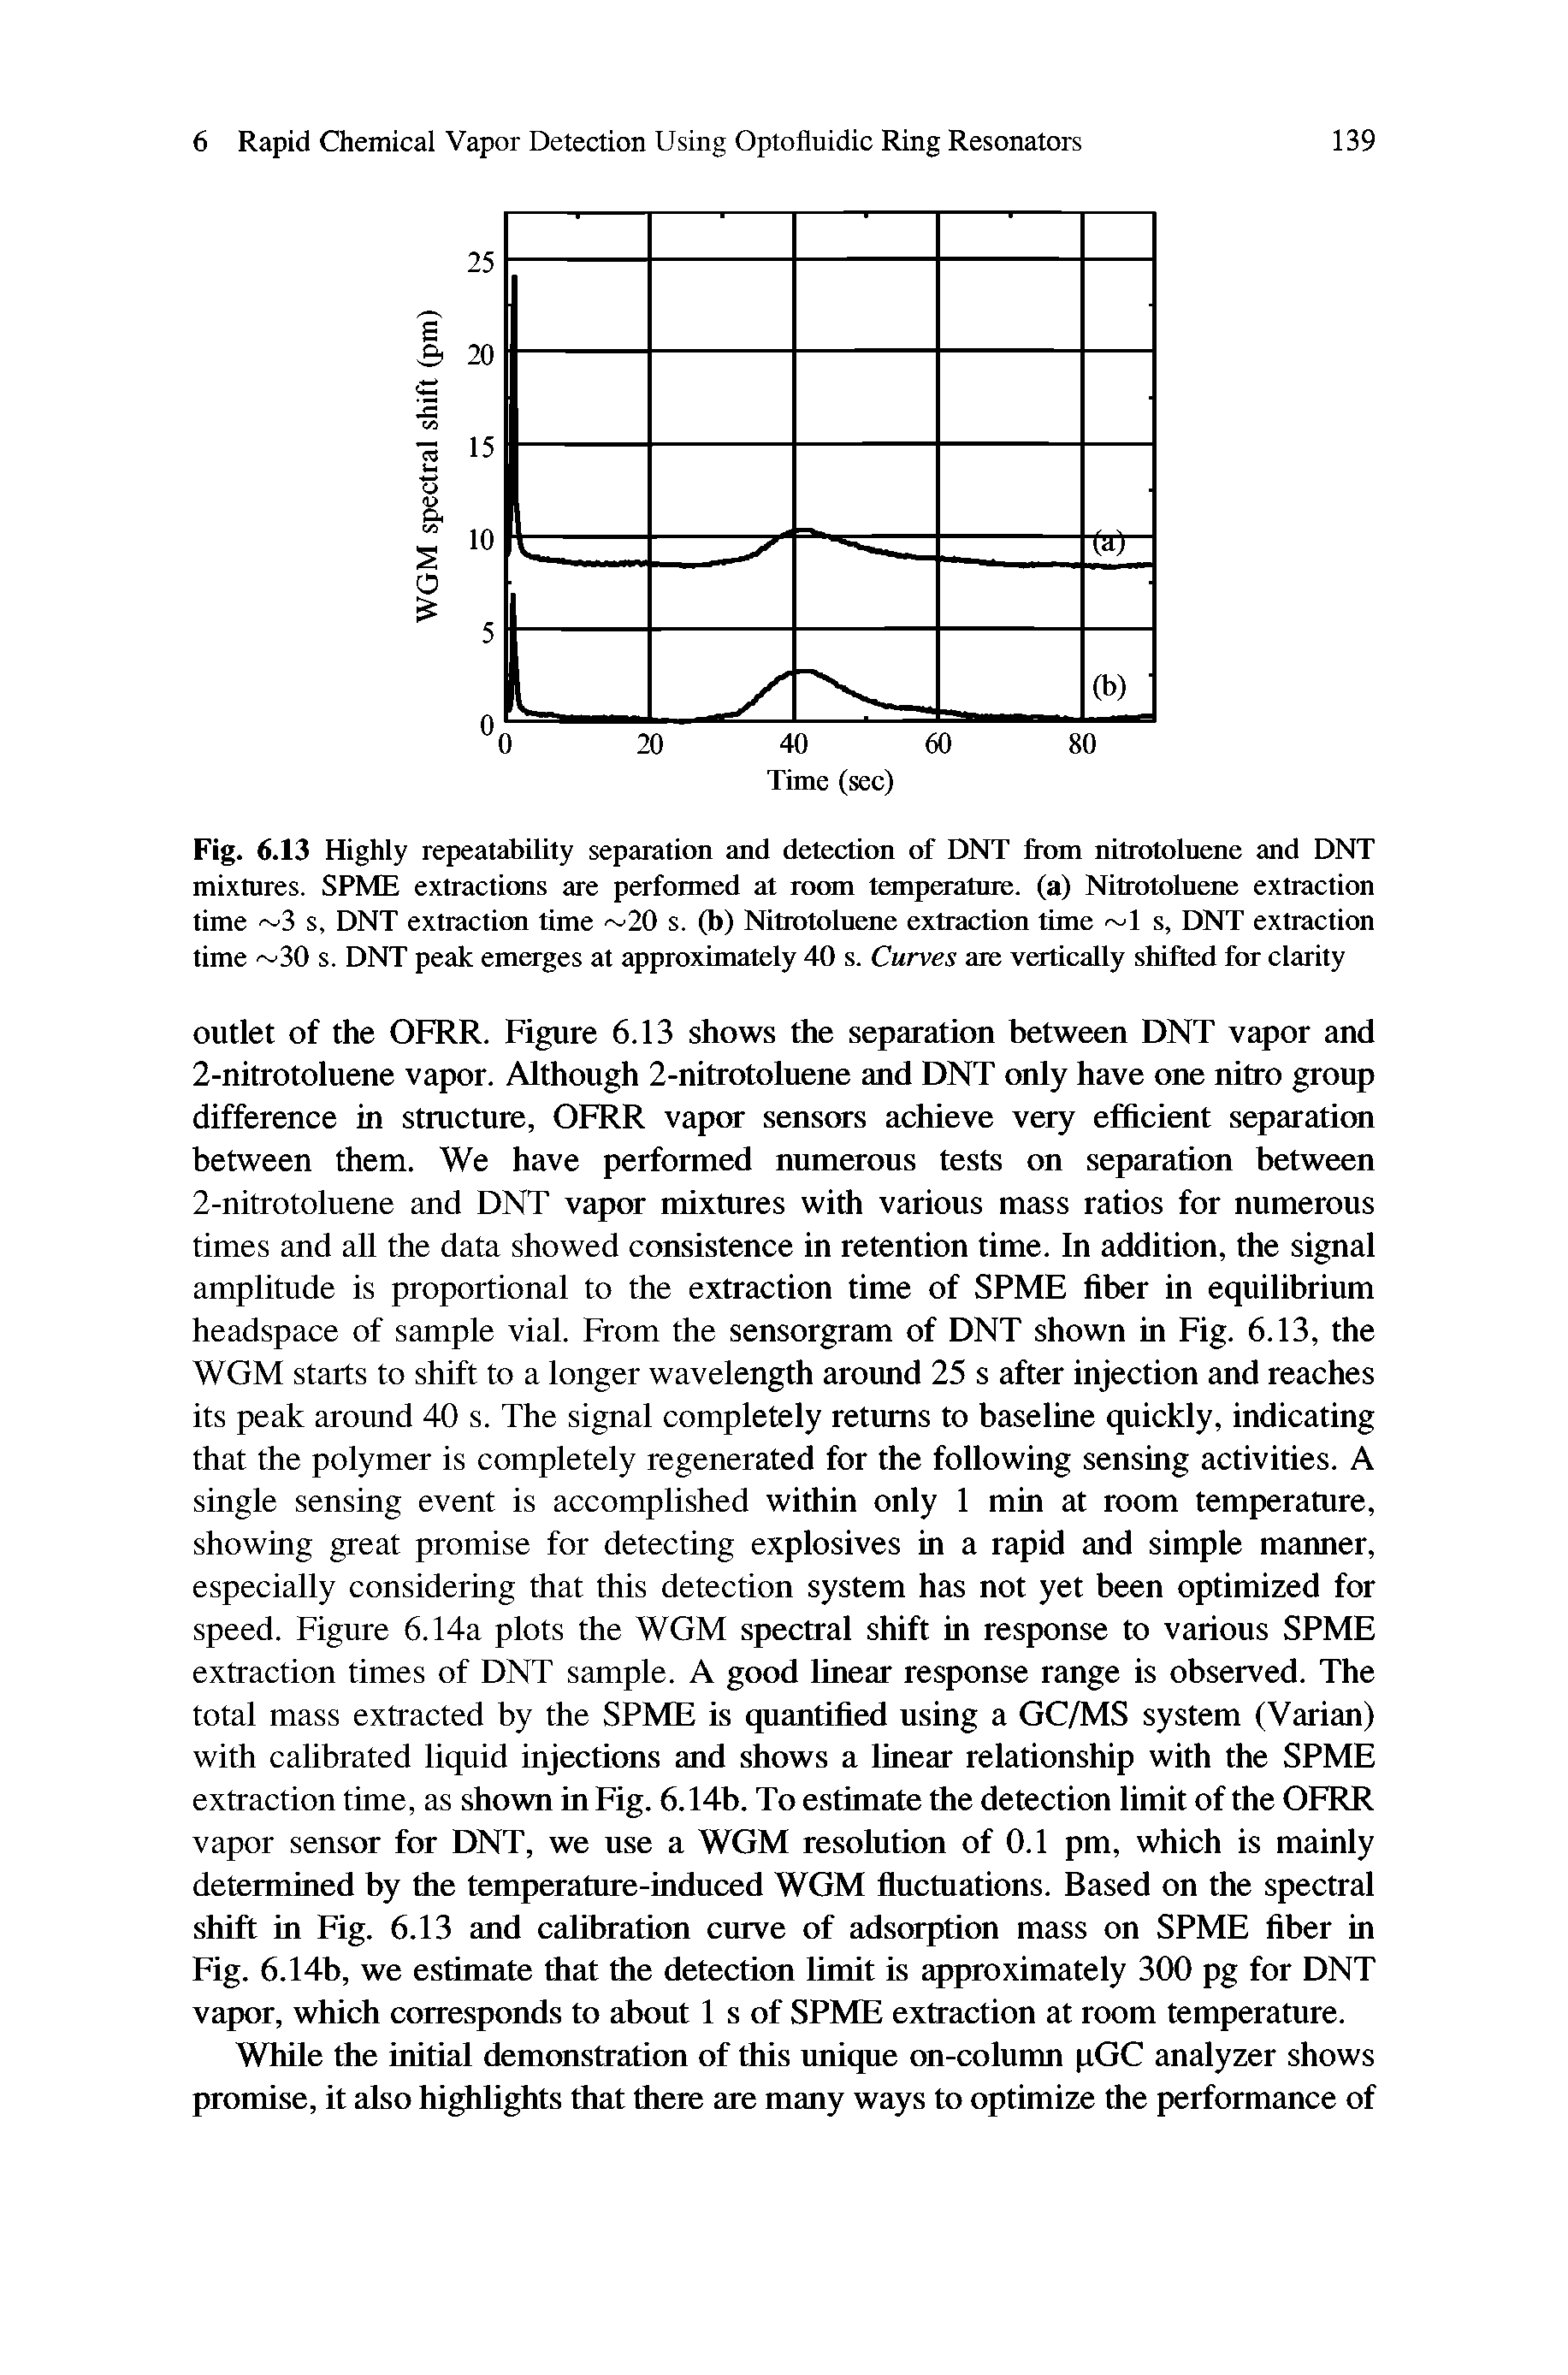 Fig. 6.13 Highly repeatability separation and detection of DNT from nitrotoluene and DNT mixtures. SPME extractions are performed at room temperature, (a) Nitrotoluene extraction time 3 s, DNT extraction time 20 s. (b) Nitrotoluene extraction time 1 s, DNT extraction time 30 s. DNT peak emerges at approximately 40 s. Curves are vertically shifted for clarity...